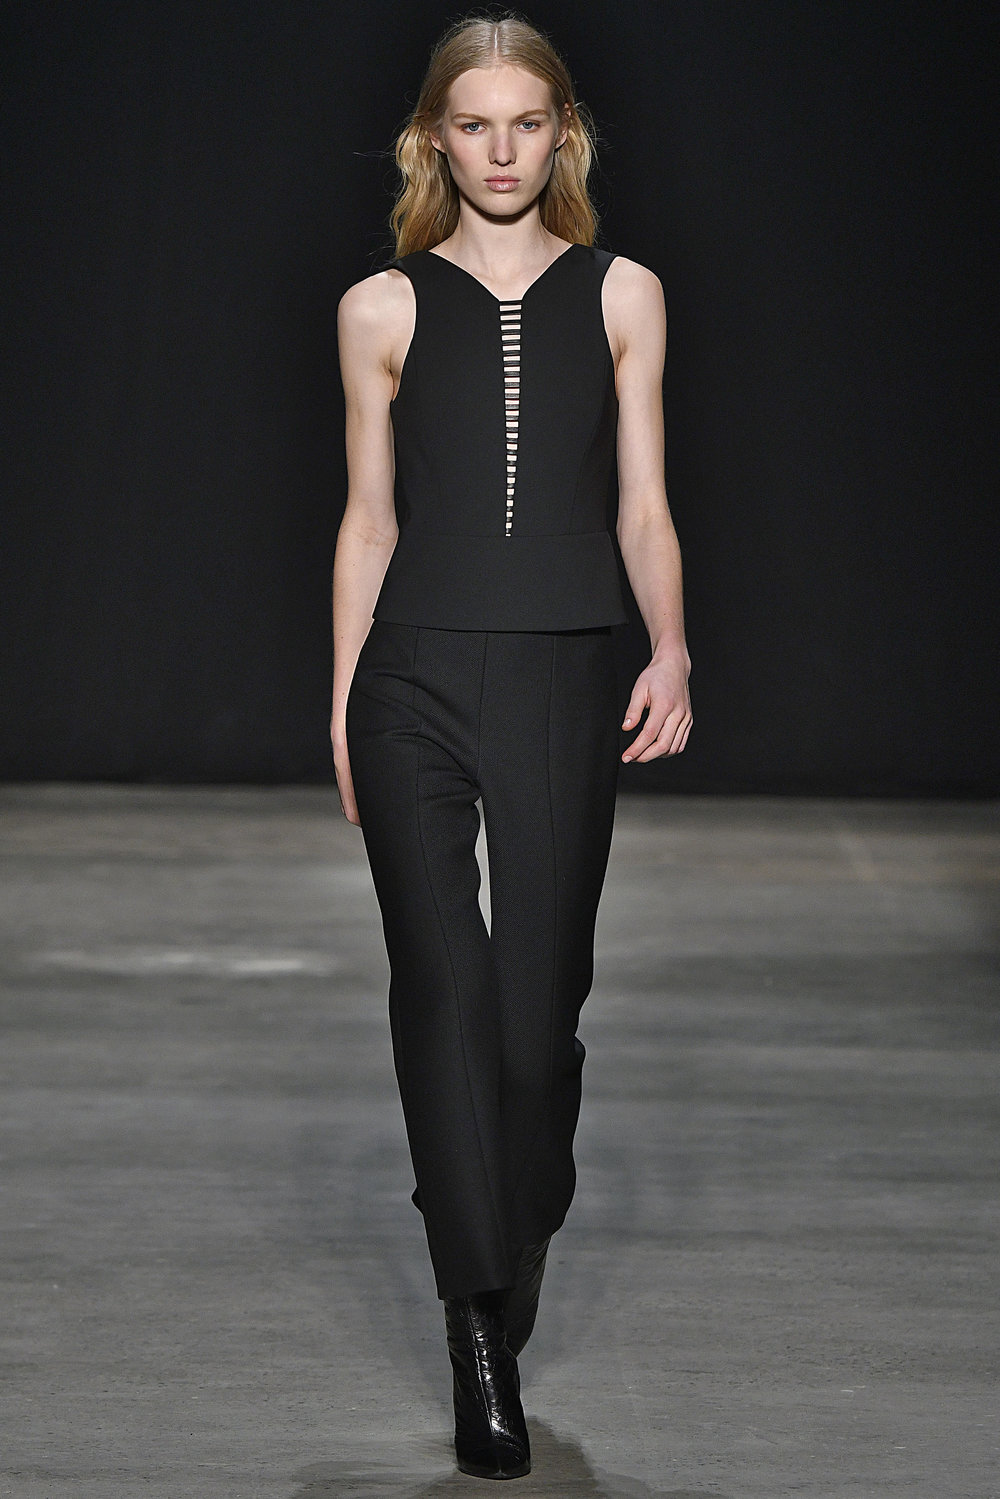 Narciso Rodriguez Ready-to-Wear Collections — Narciso Rodriguez